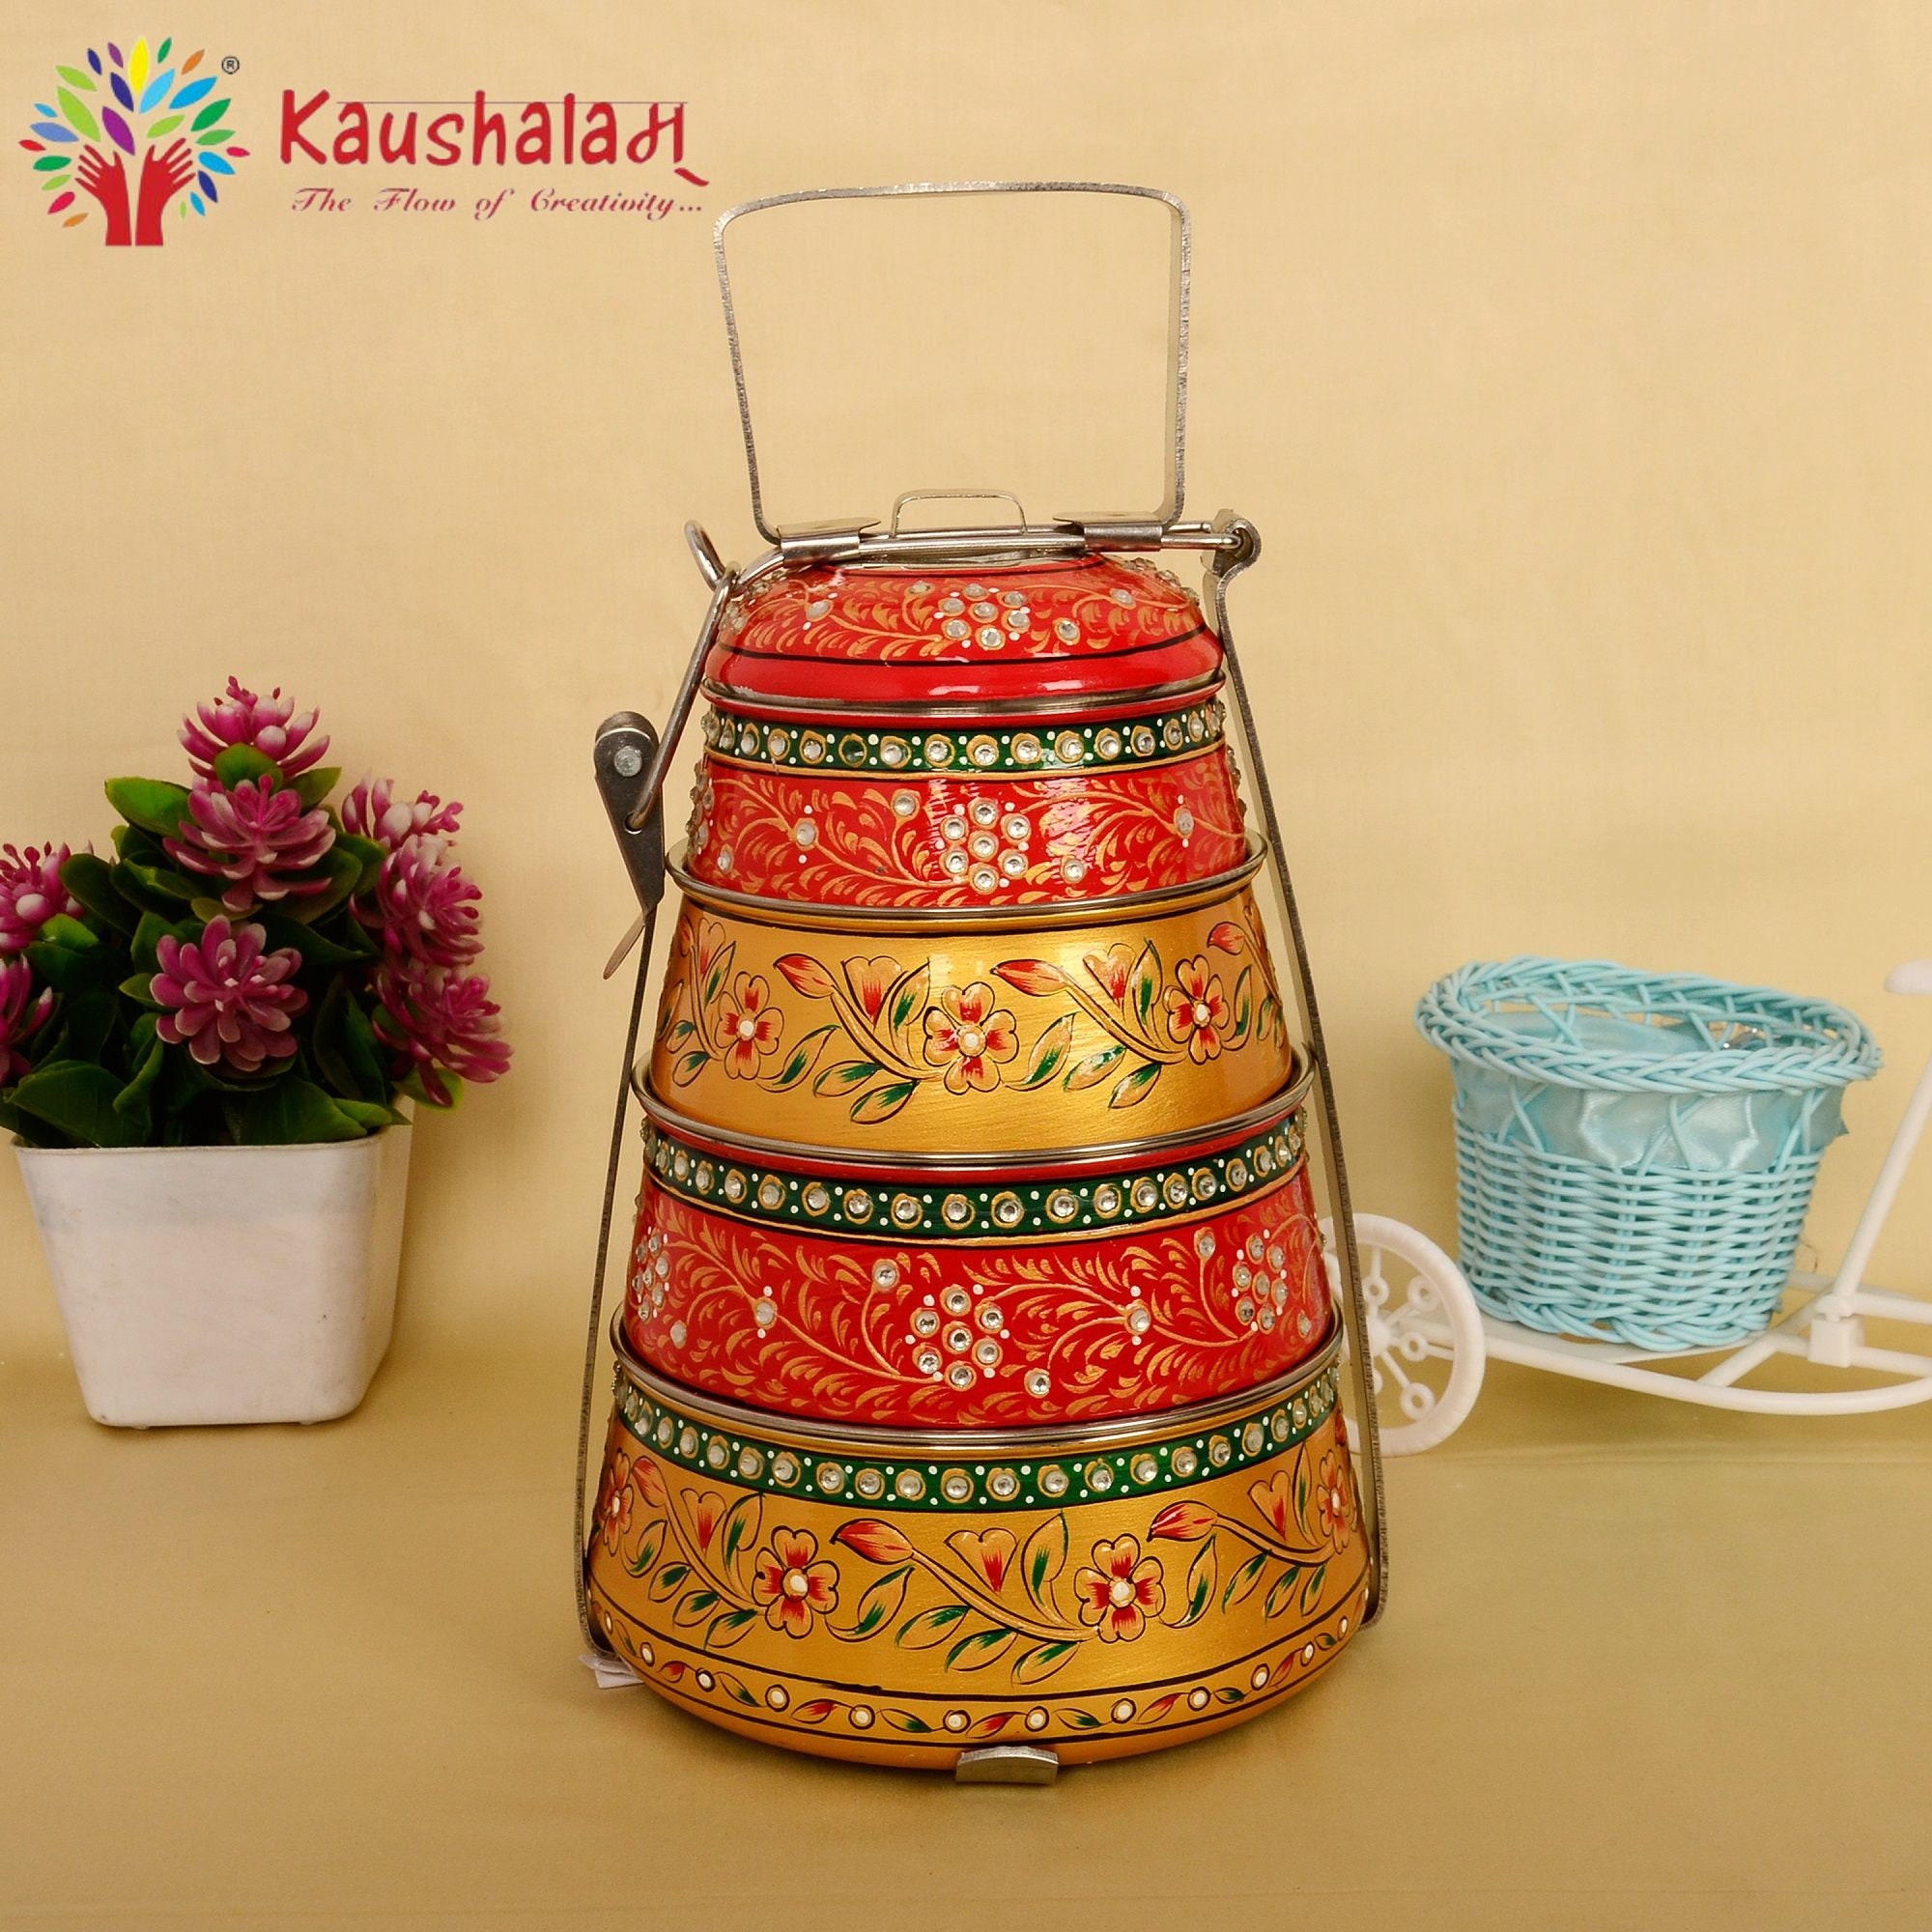 Kaushalam Hand Painted 3 Tier Lunch Box, Indian Dabba, Stainless Steel Eco- box, 3 Food Containers Tiffin, Food Grade Containers 